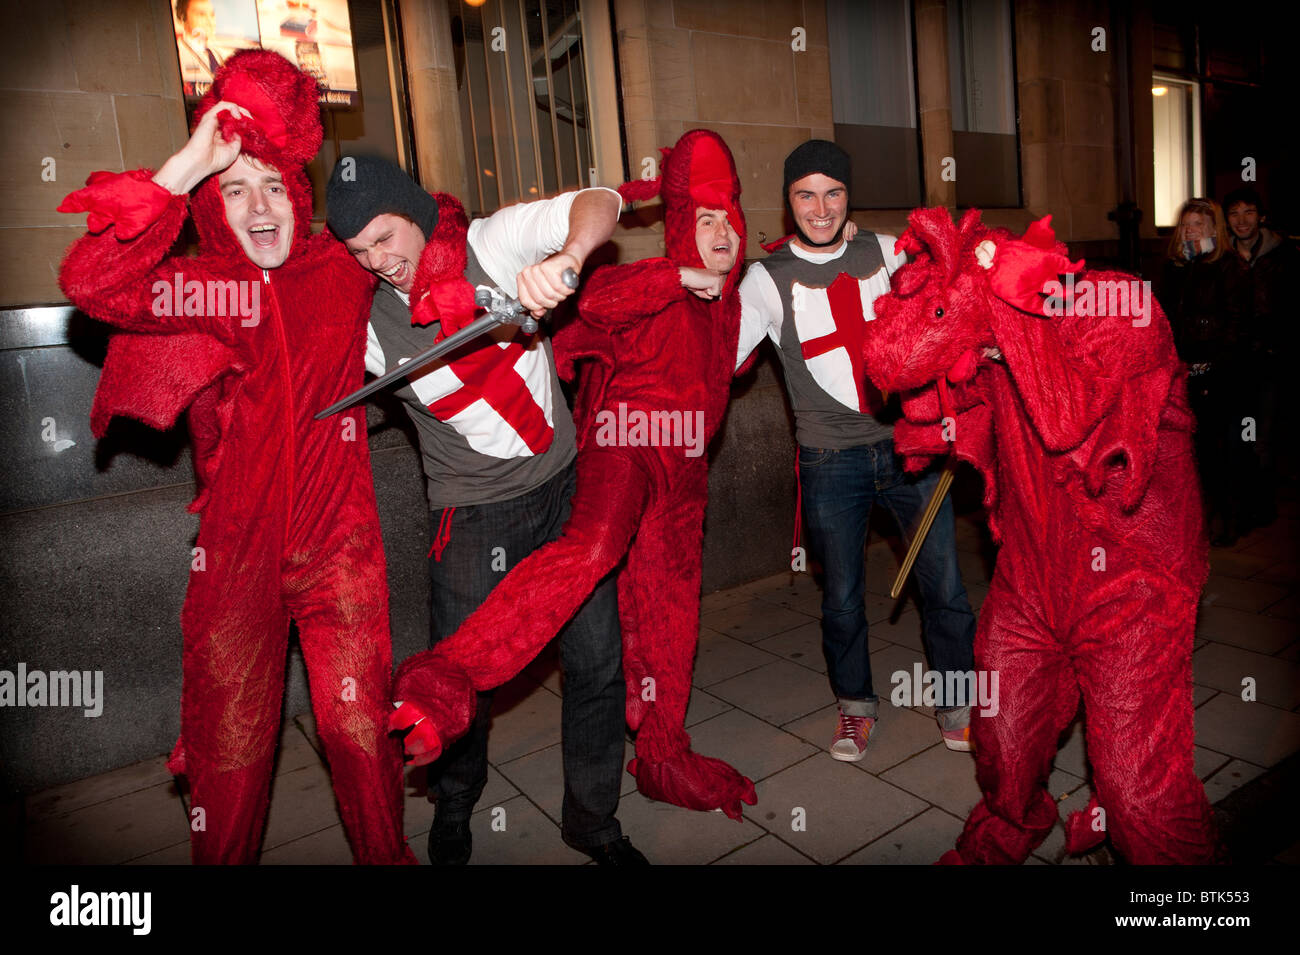 Five Men dressed as George and the Dragon for a Halloween fancy dress party night in Aberystwyth Wales UK Stock Photo